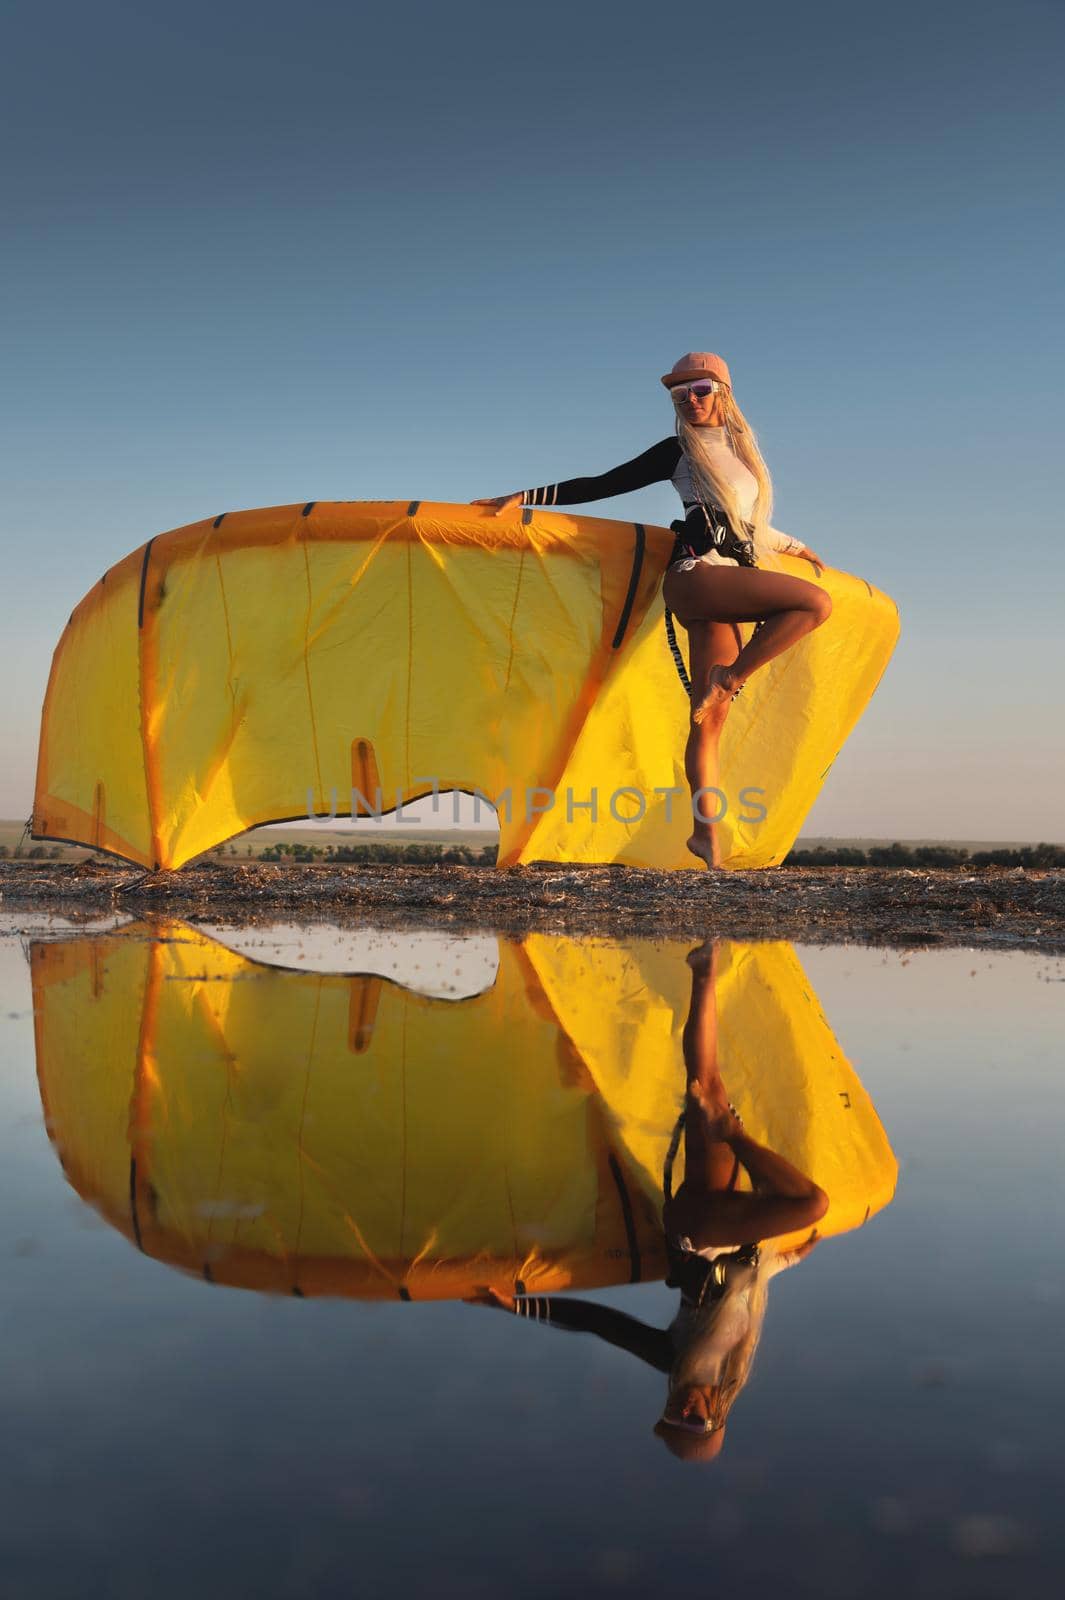 Attractive stylish young caucasian woman in cap sunglasses and kitesurfer outfit standing next to sandy shore next to her kite at sunset reflecting in the water.